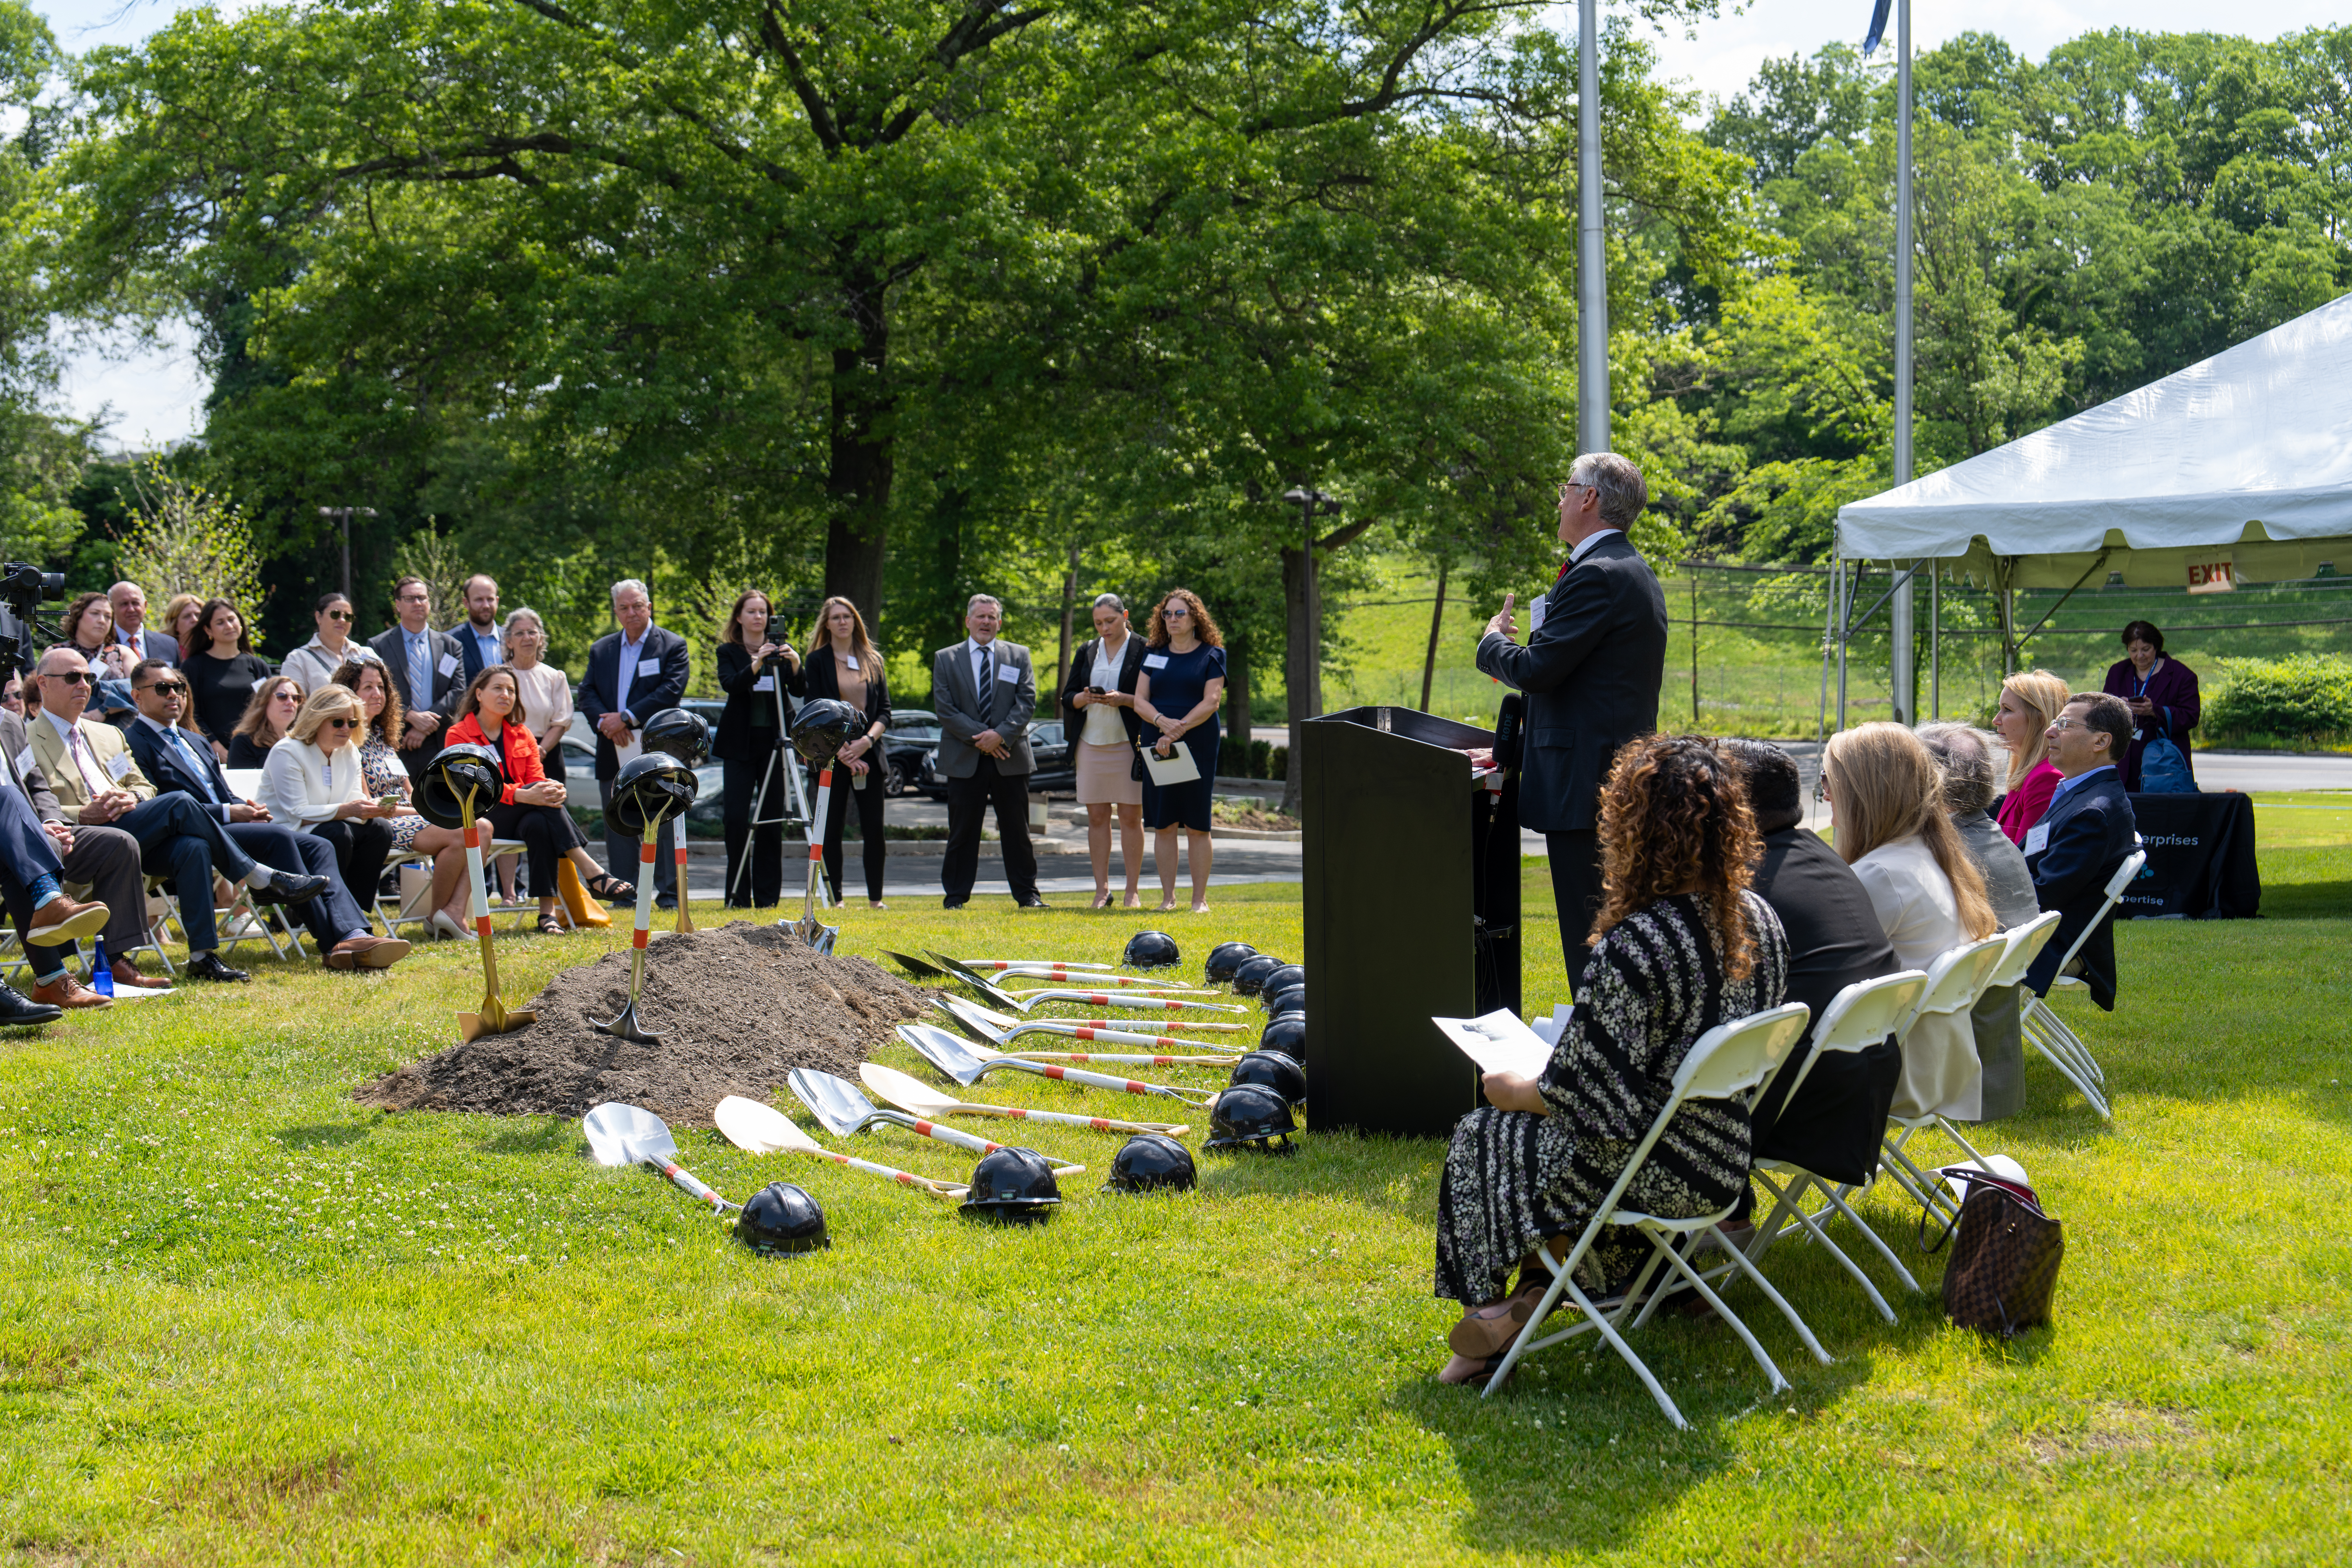 New York Blood Center Enterprises Hosts Official Groundbreaking for New State-of-the-Art Campus in Rye, NY